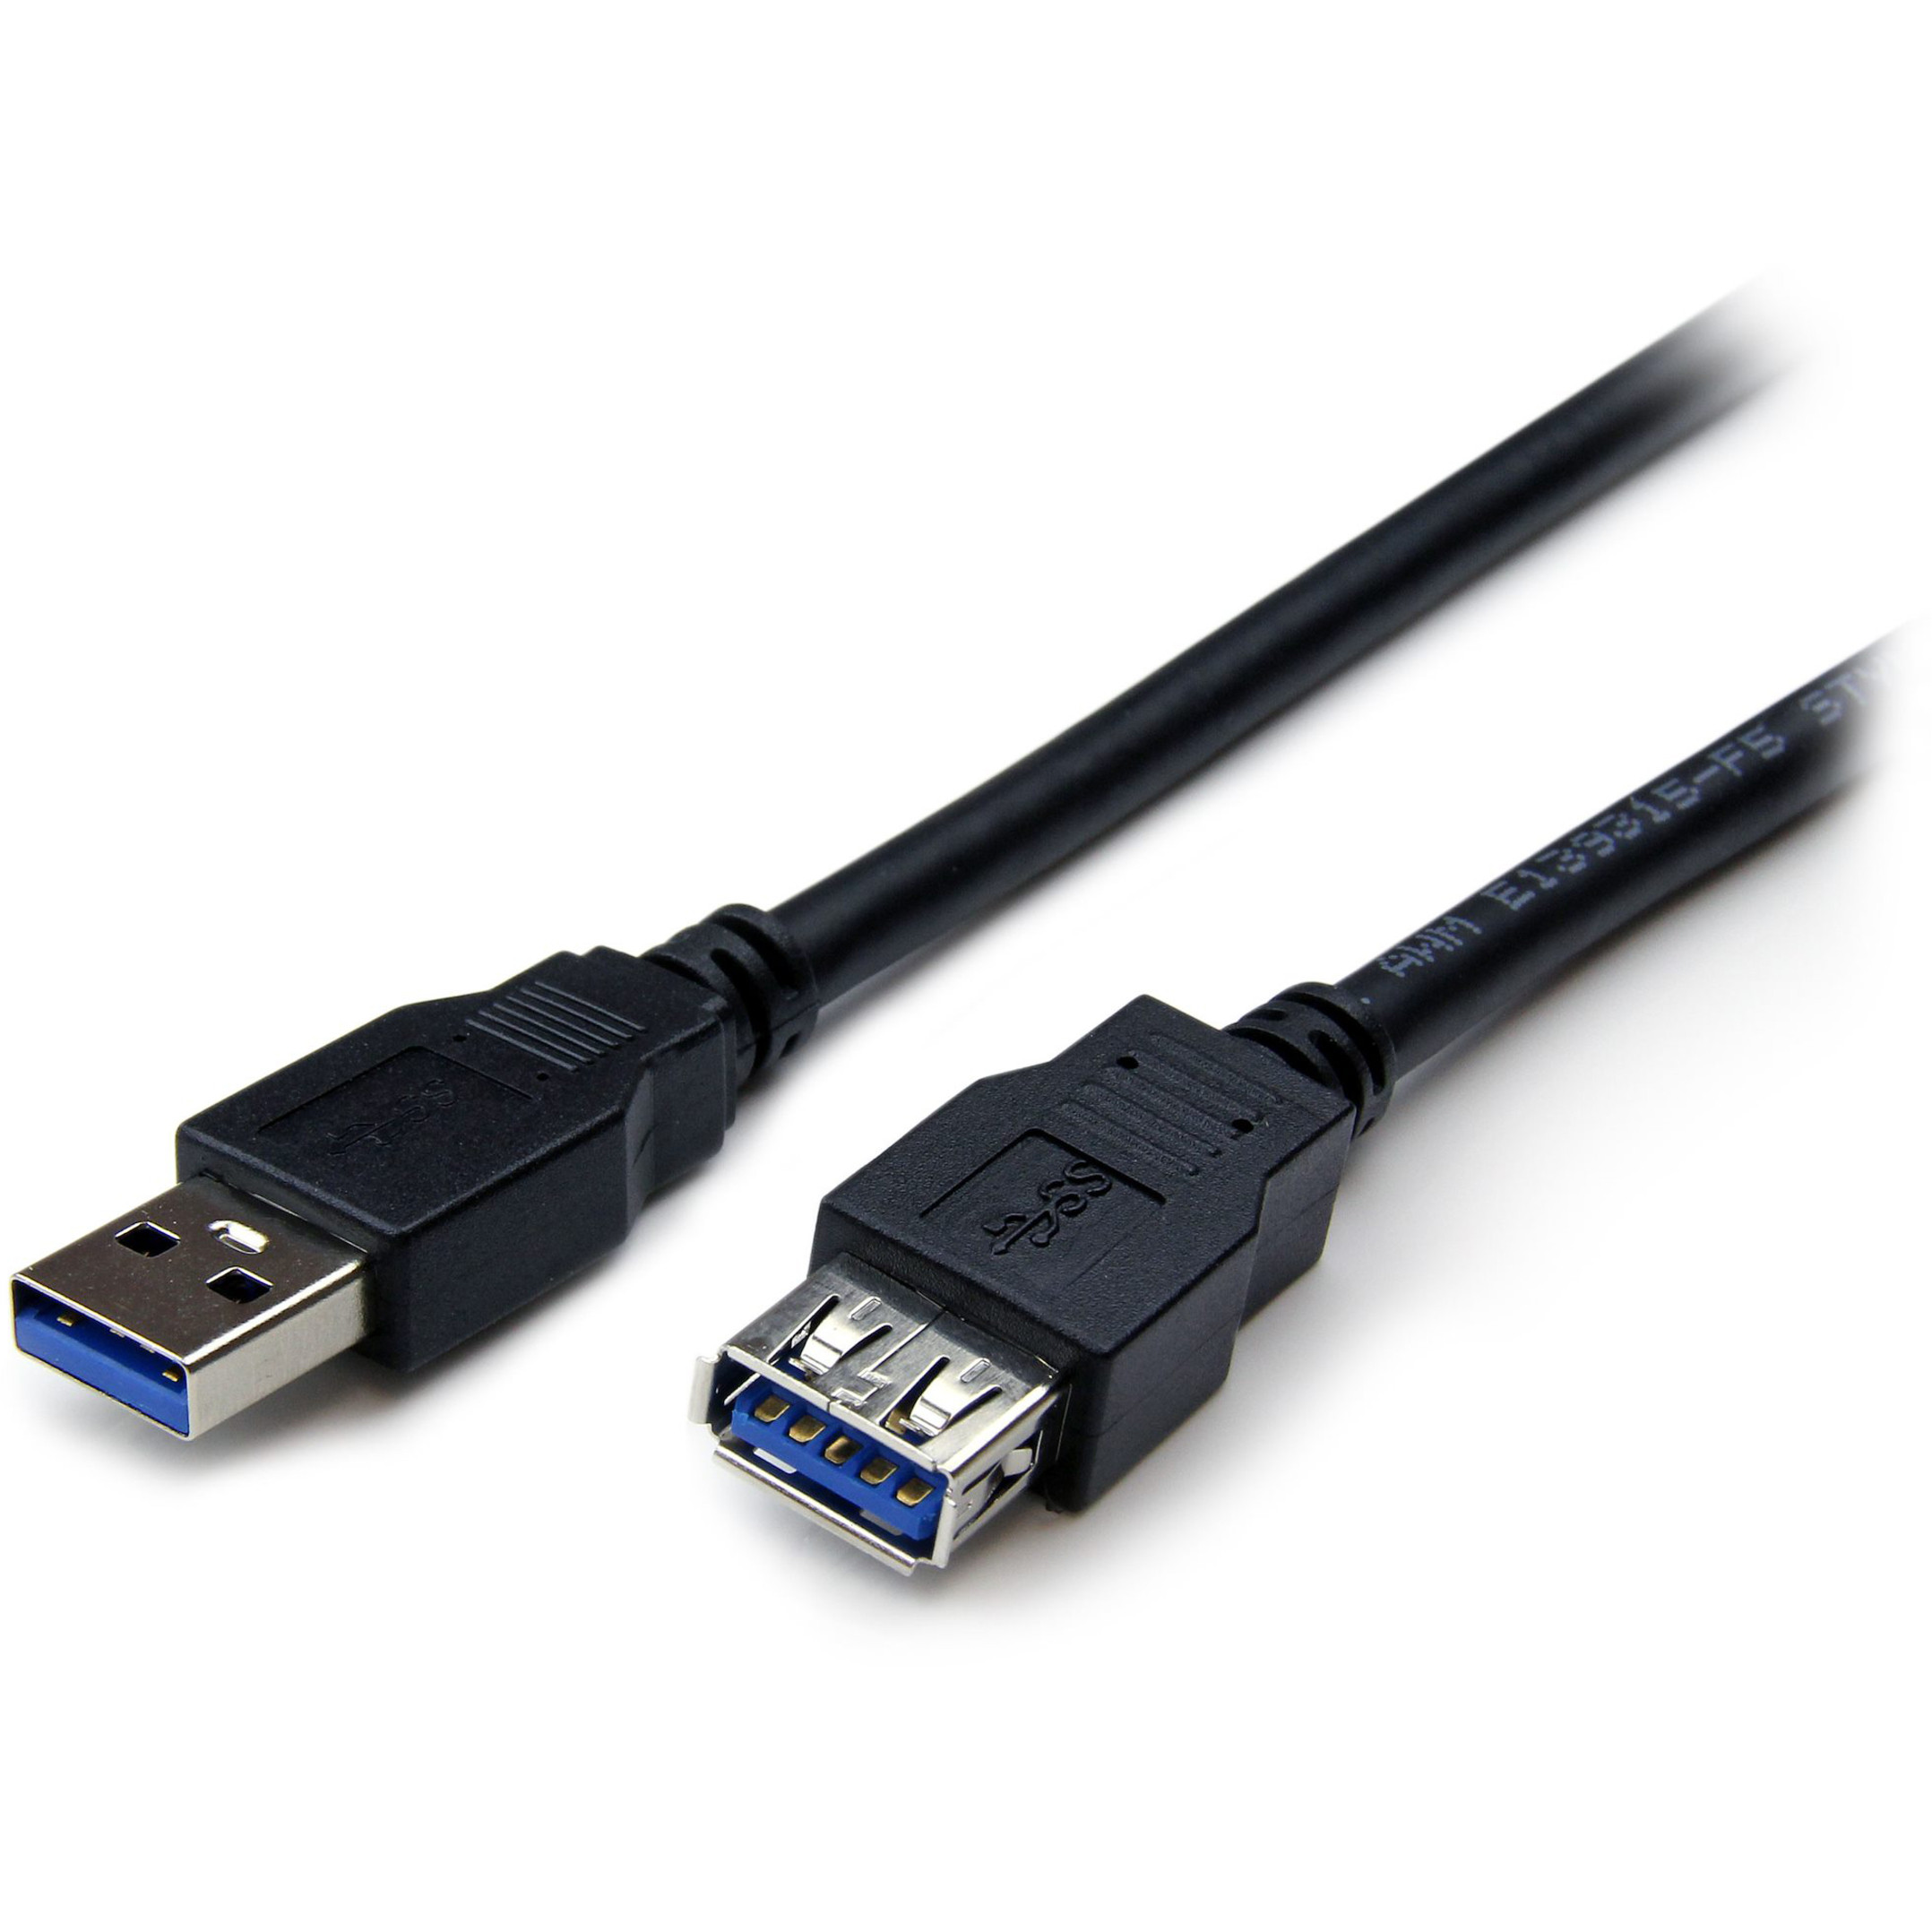 Startech .com 6 ft Black SuperSpeed USB 3.0 Extension Cable A to AM/FExtend your USB 3.0 SuperSpeed cable by up to an additional 6 feet… USB3SEXT6BK